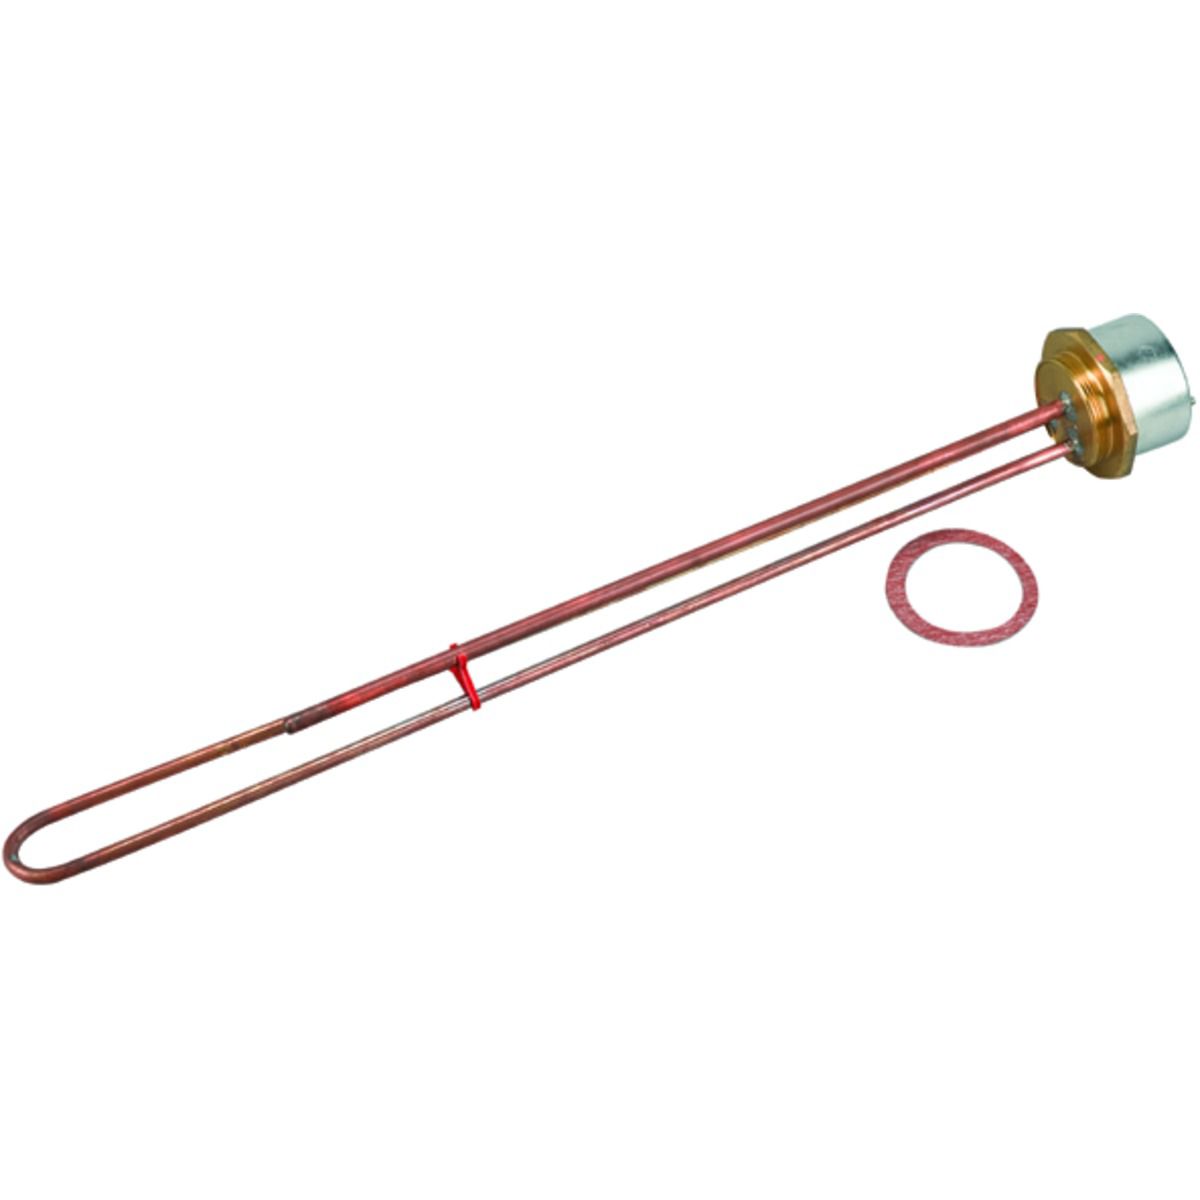 Image of Primaflow Copper Cylinder Immersion Heating Element - 27in